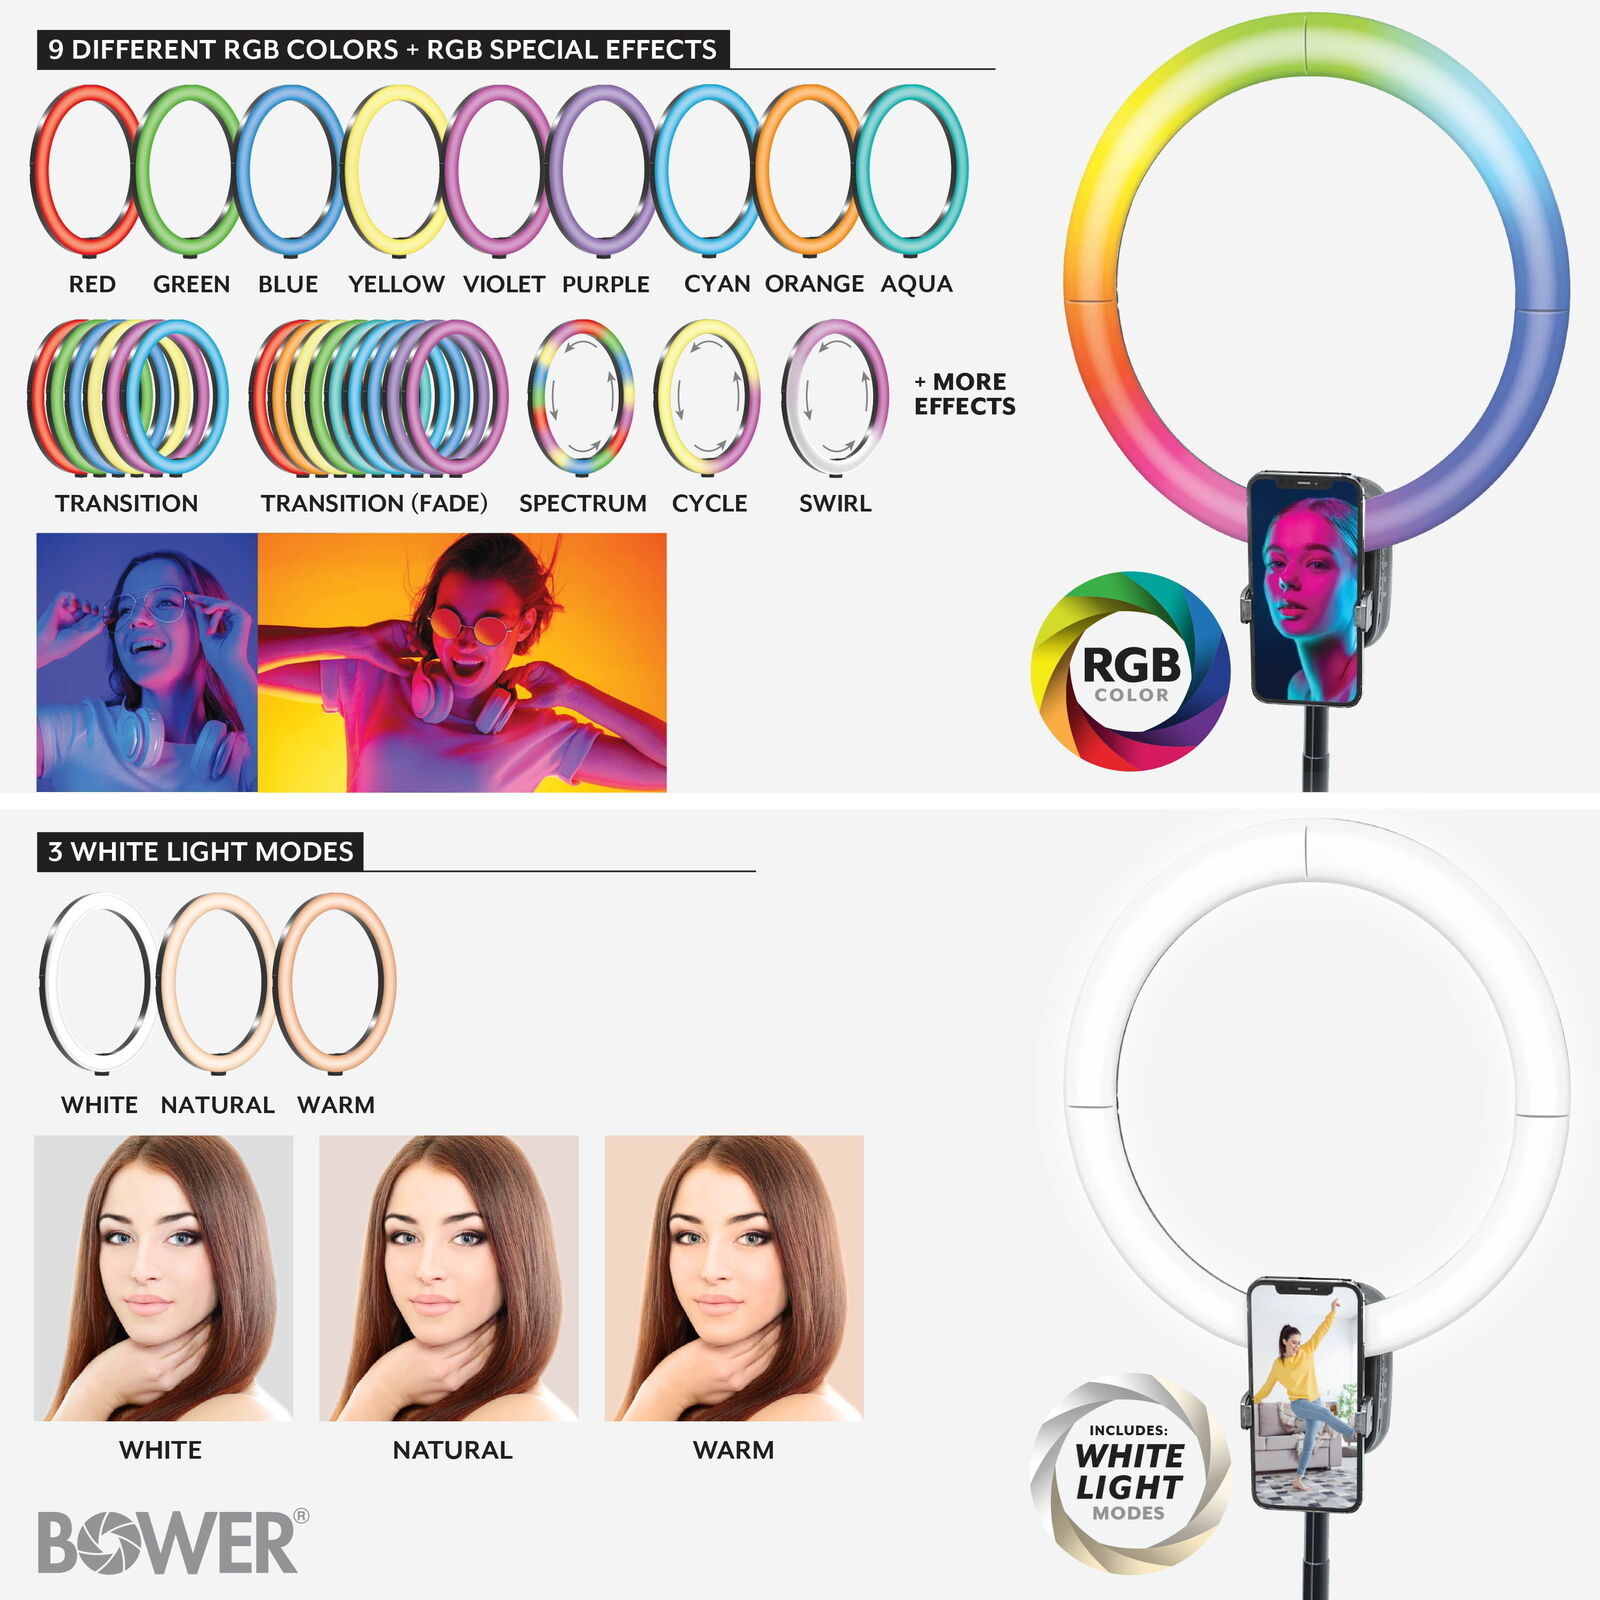 Wireless Creator 12-inch Collapsible RGB LED Ring Light, Black Unbranded - фотография #6